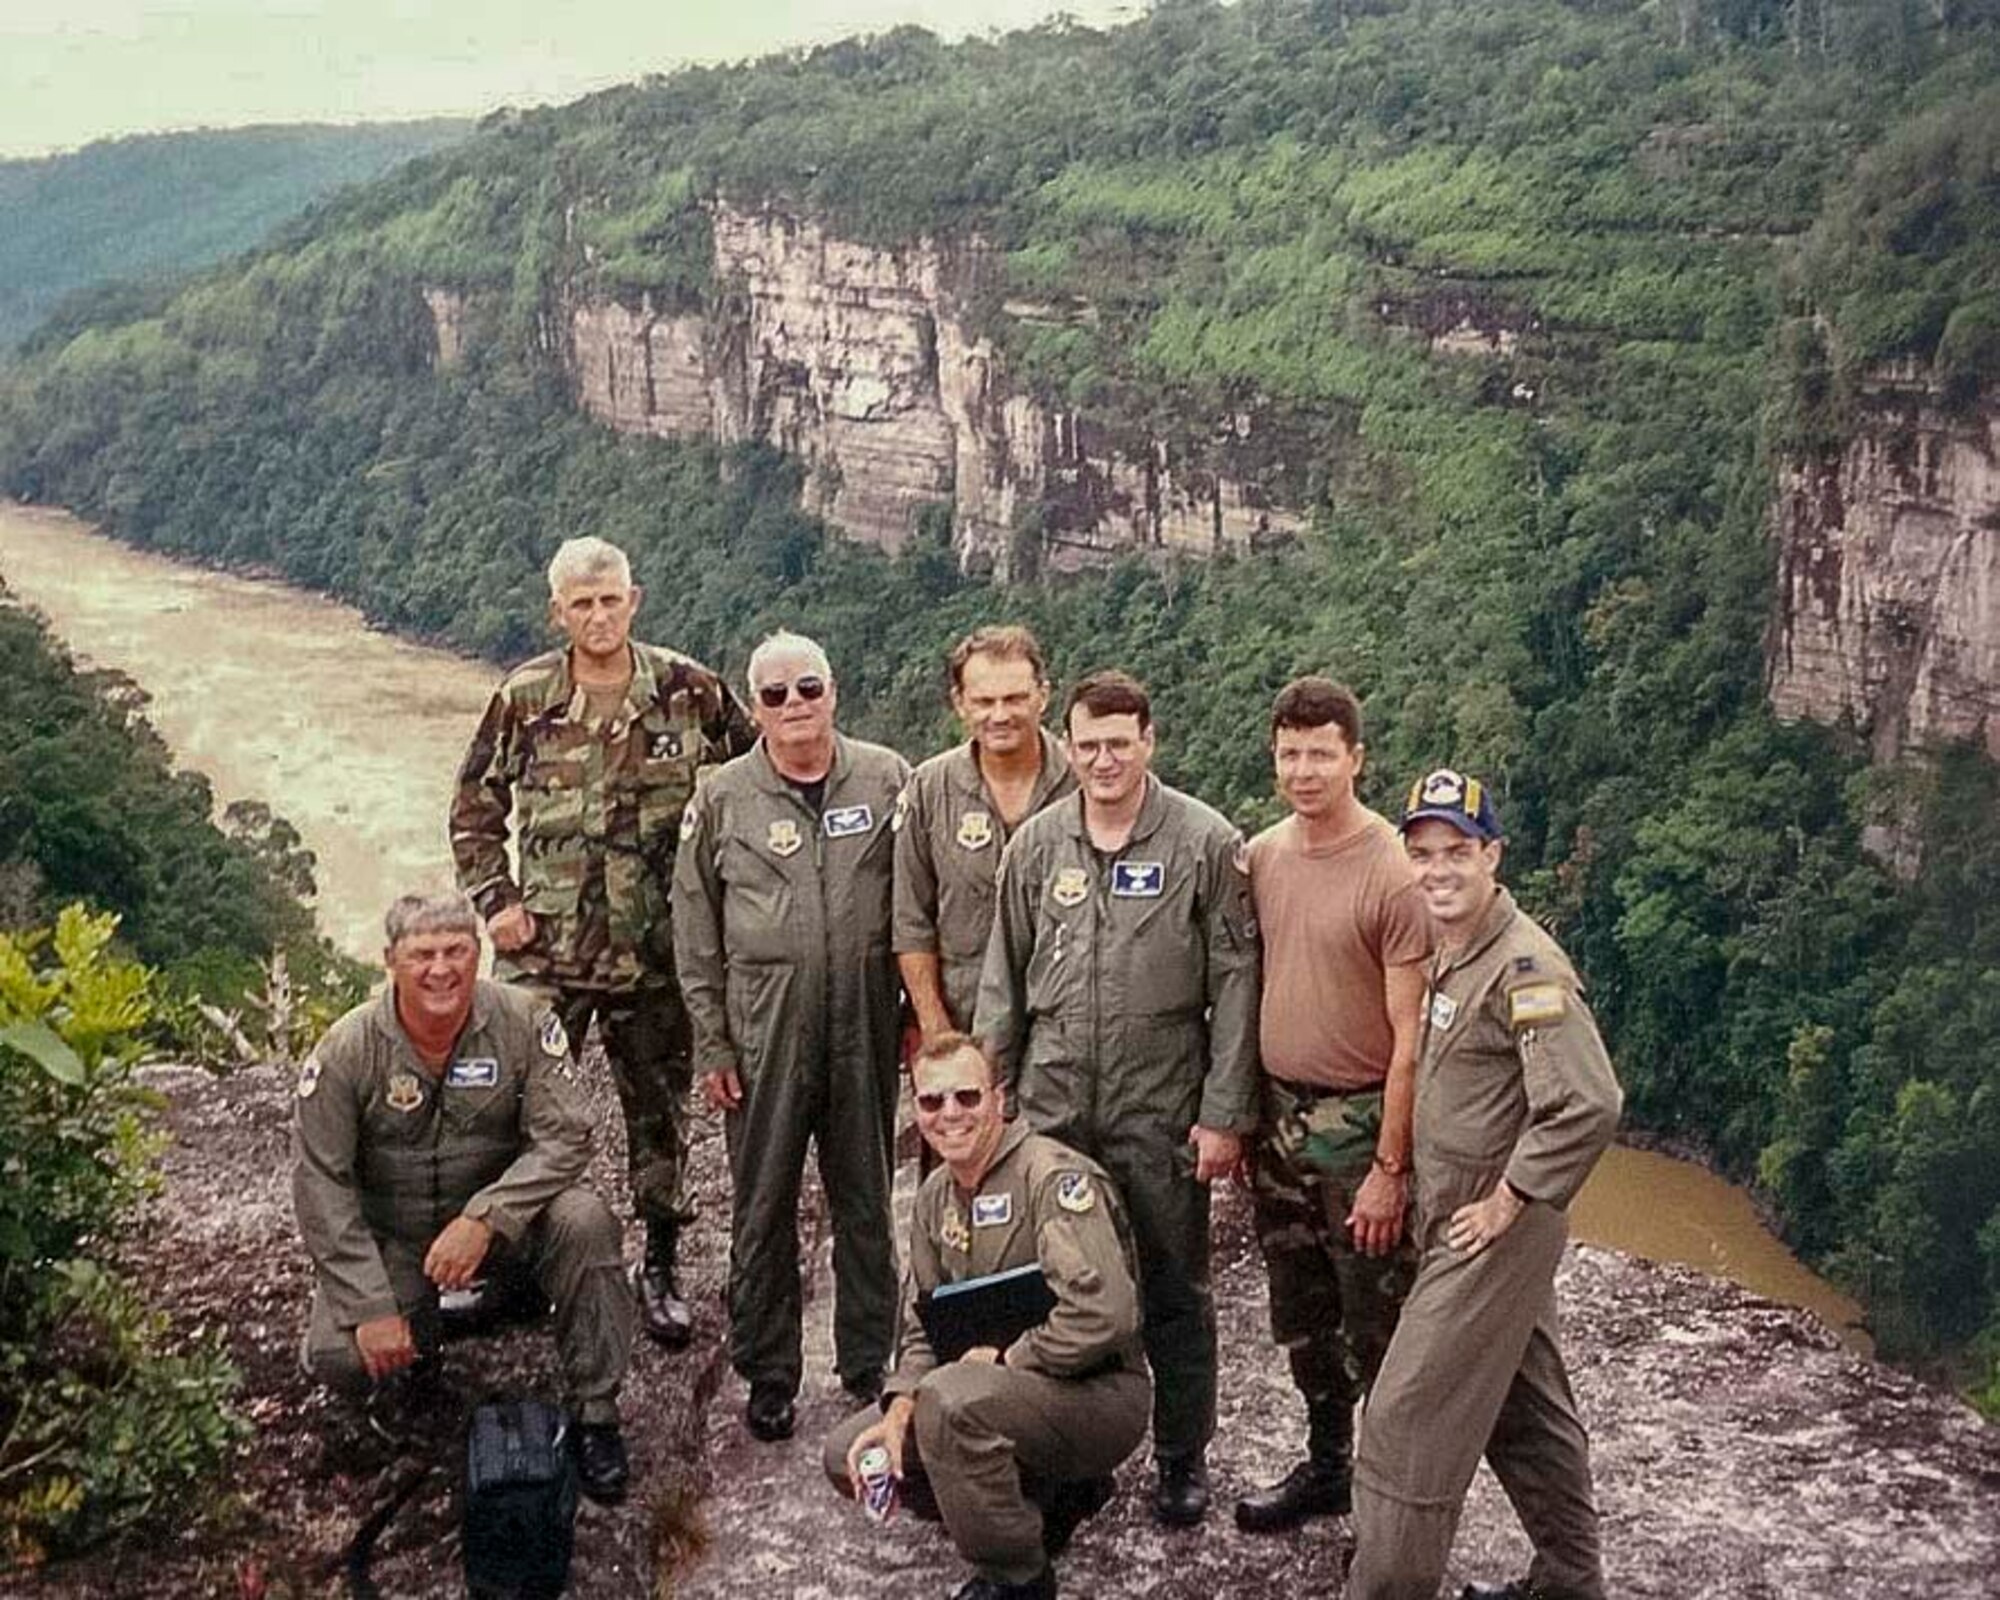 Air Force Reserve crew members pose on a cliff at Araracuara, Colombia, 1997. Prior to being a loadmaster, Tarrance also served as an aeromedical evacuation technician, flight medical aidman, and a jumpmaster. (Courtesy photo)